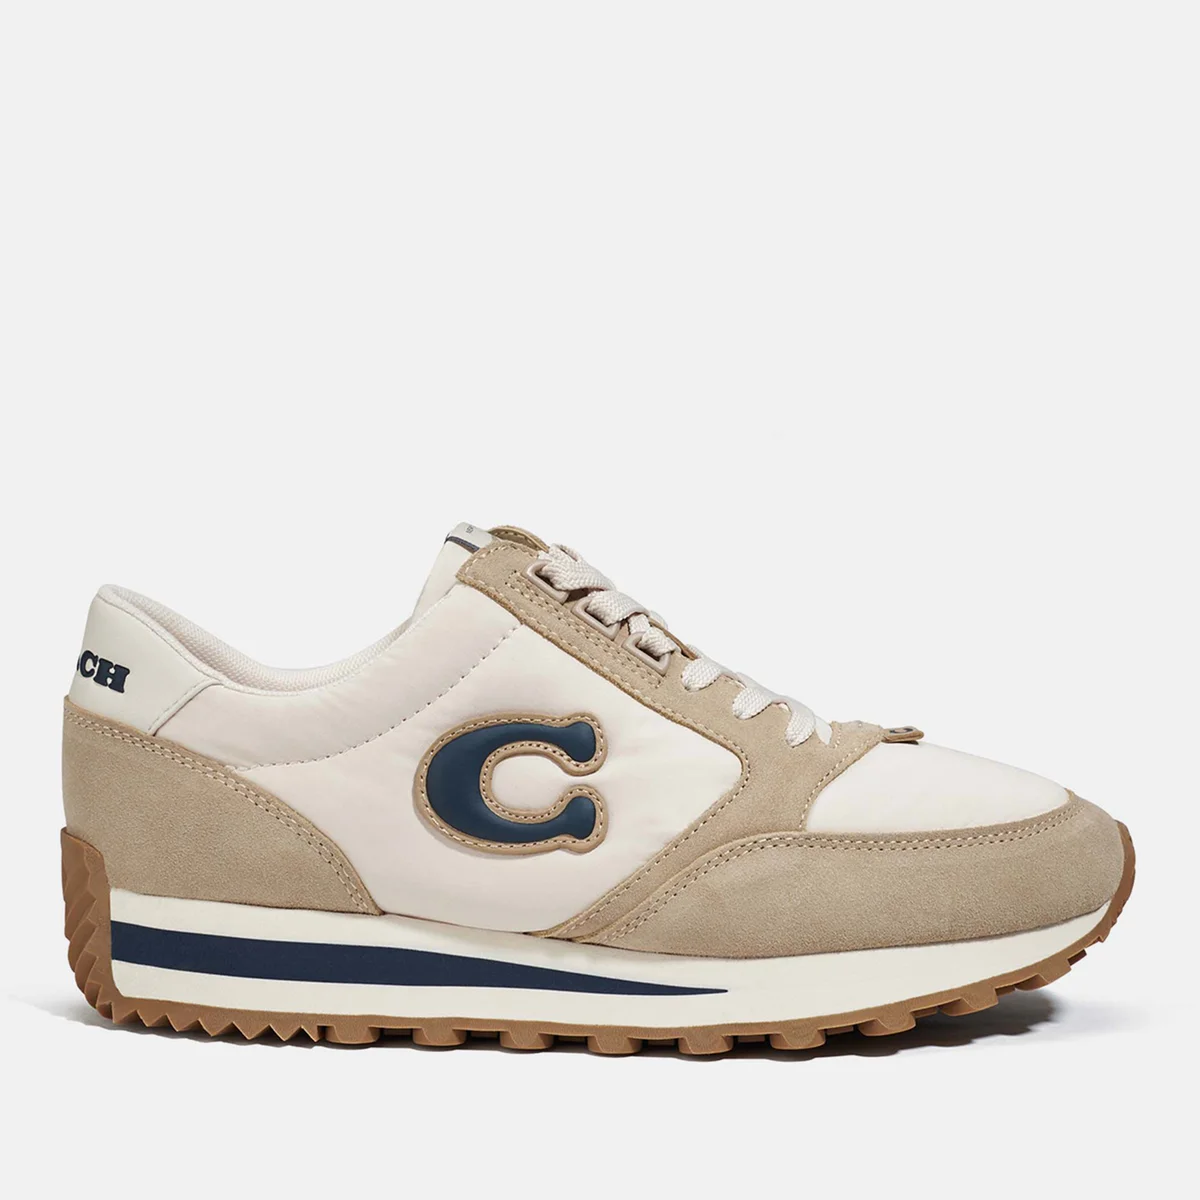 Coach Women's Suede, Shell and Leather Trainers Image 1